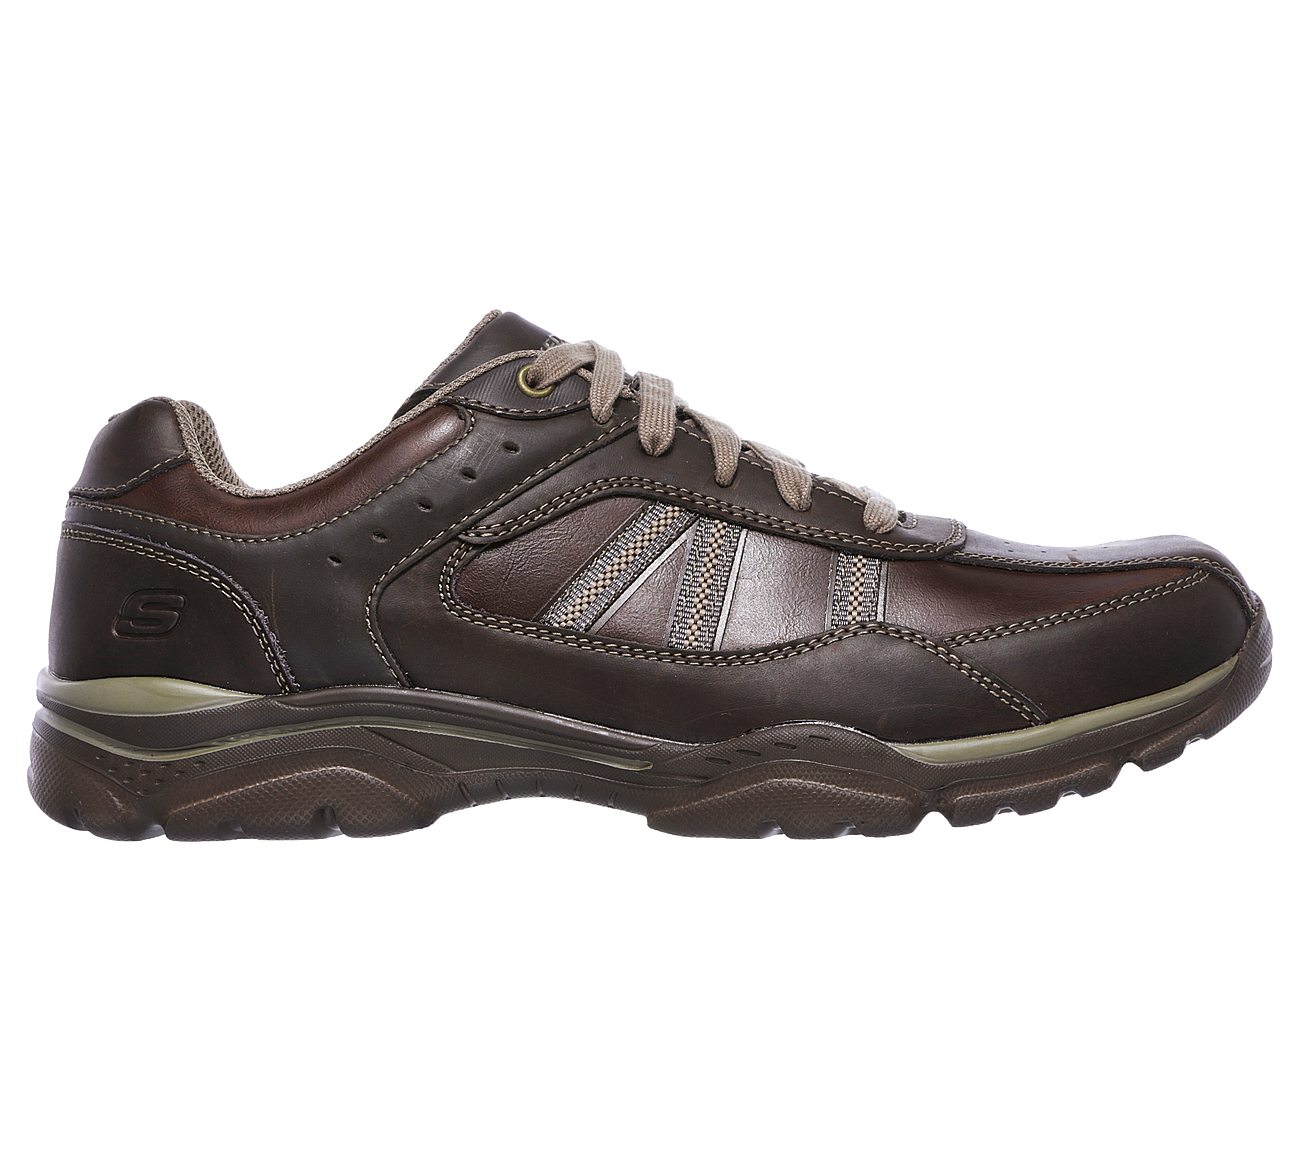 Buy SKECHERS Relaxed Fit: Rovato - Texon Relaxed Fit Shoes